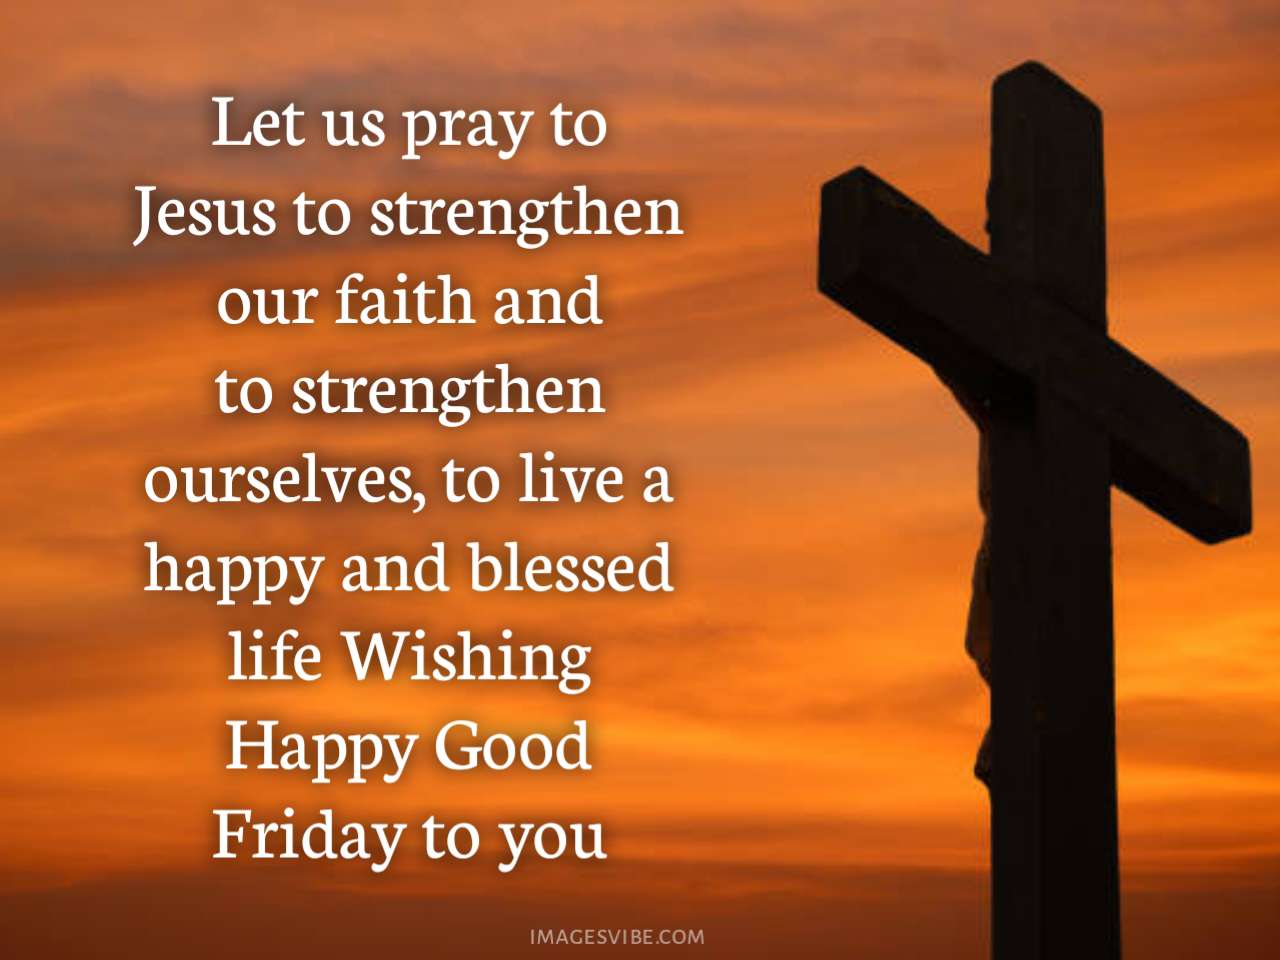 Best 30+ Happy Good Friday Images & Wishes - Images Vibe